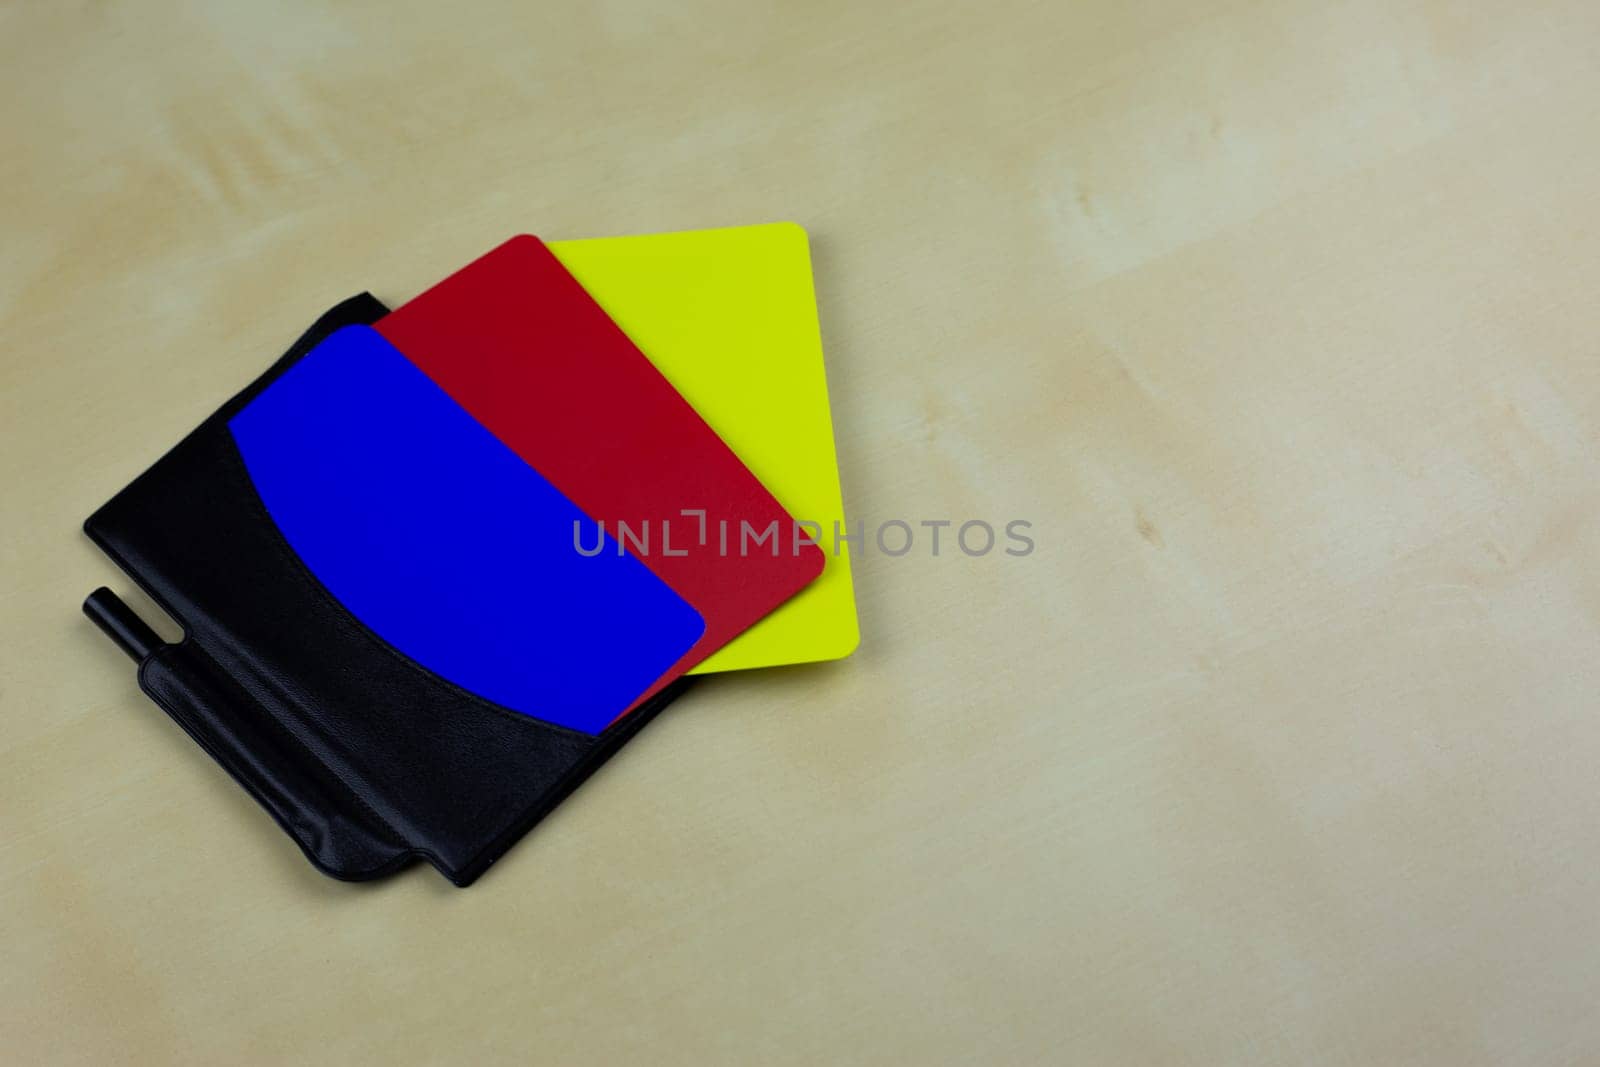 Football referee set for chest pocket with notepad and player cards, blue, red and yellow football card, changes to the rules of the game